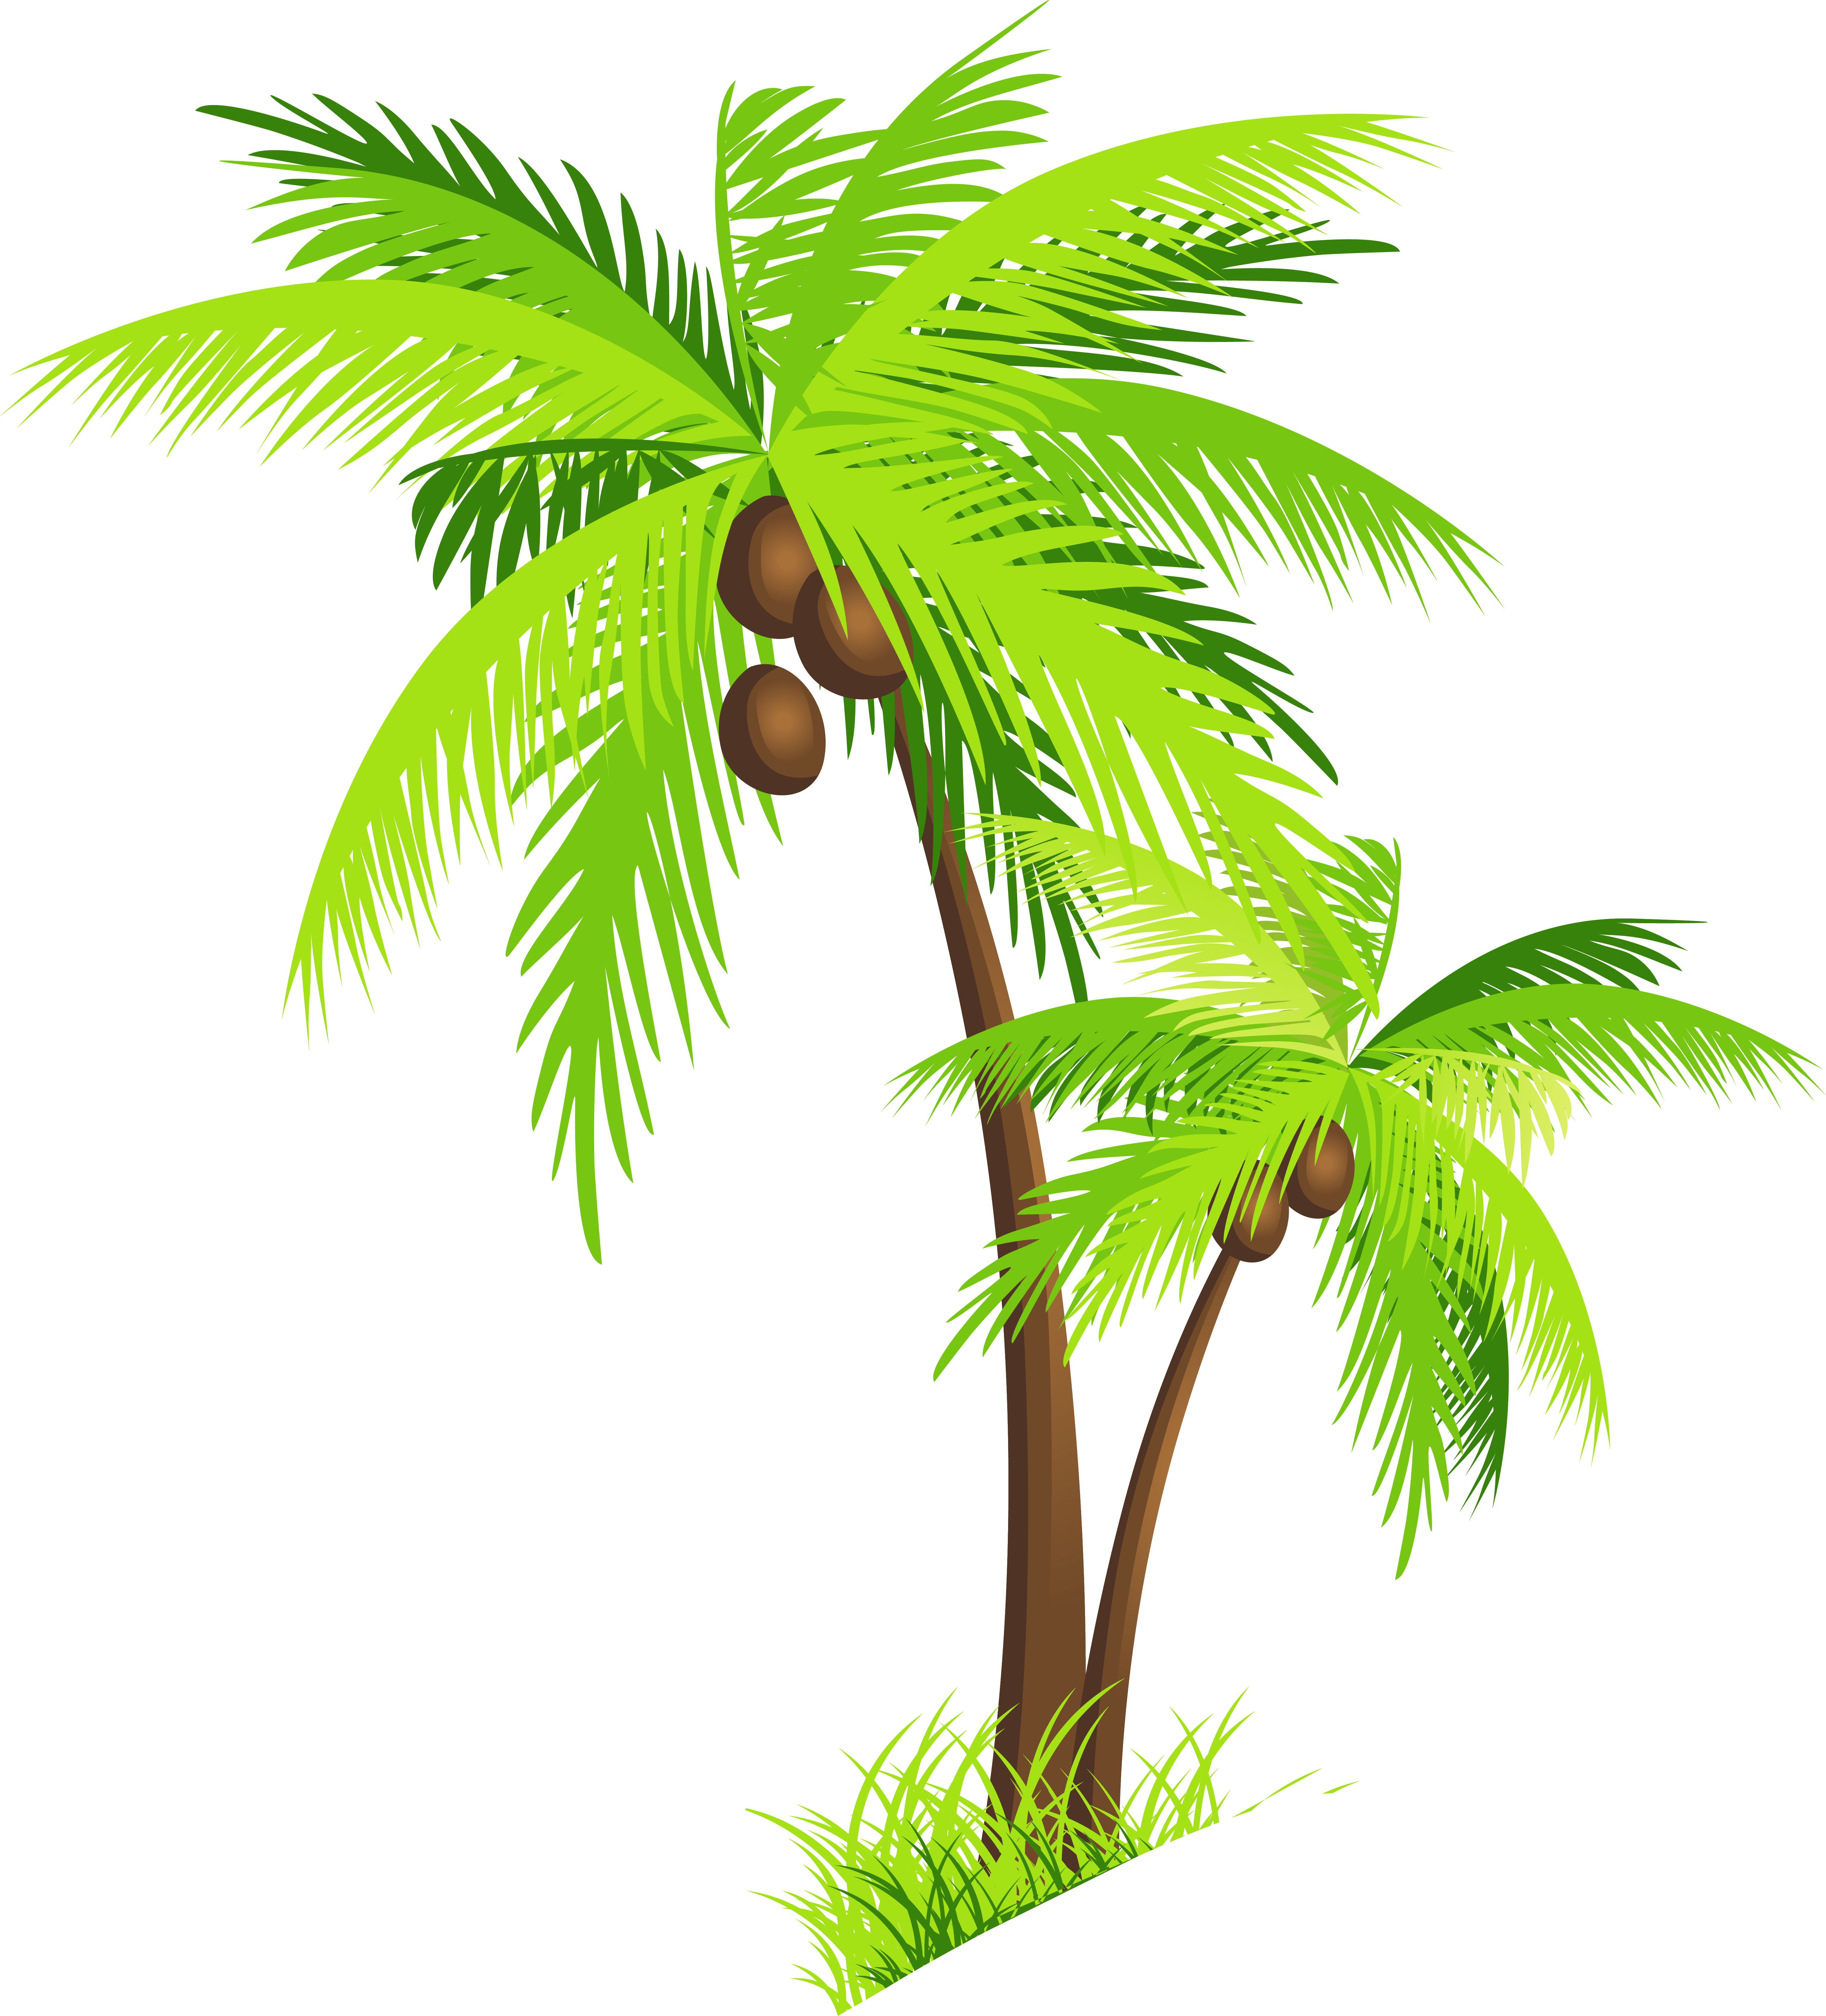 Free Transparent Palm Trees, Download Free Transparent Palm Trees png ...